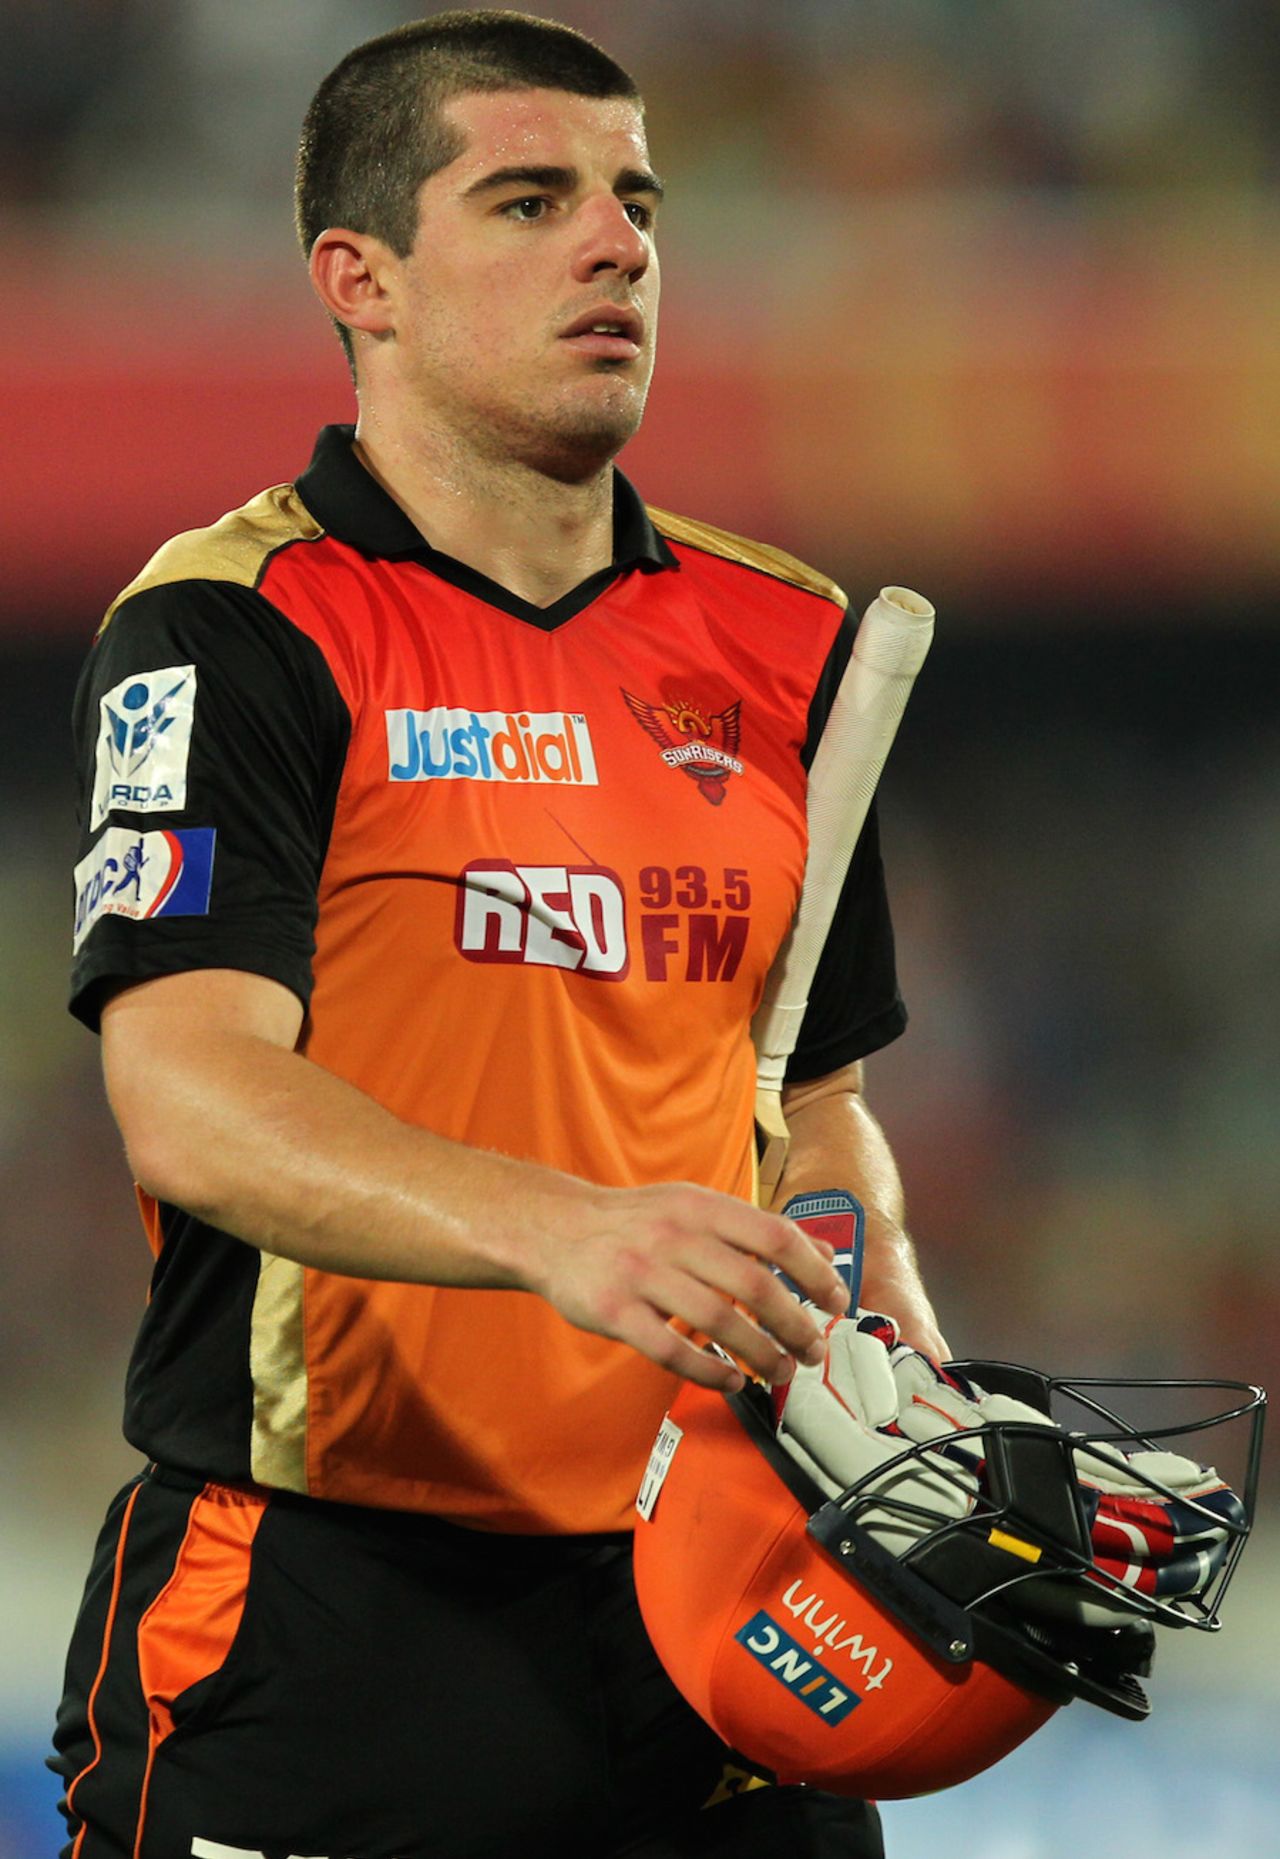 Moises Henriques could only contribute 11 to the team score, Sunrisers Hyderabad v Mumbai Indians, IPL 2015, Hyderabad, May 17, 2015